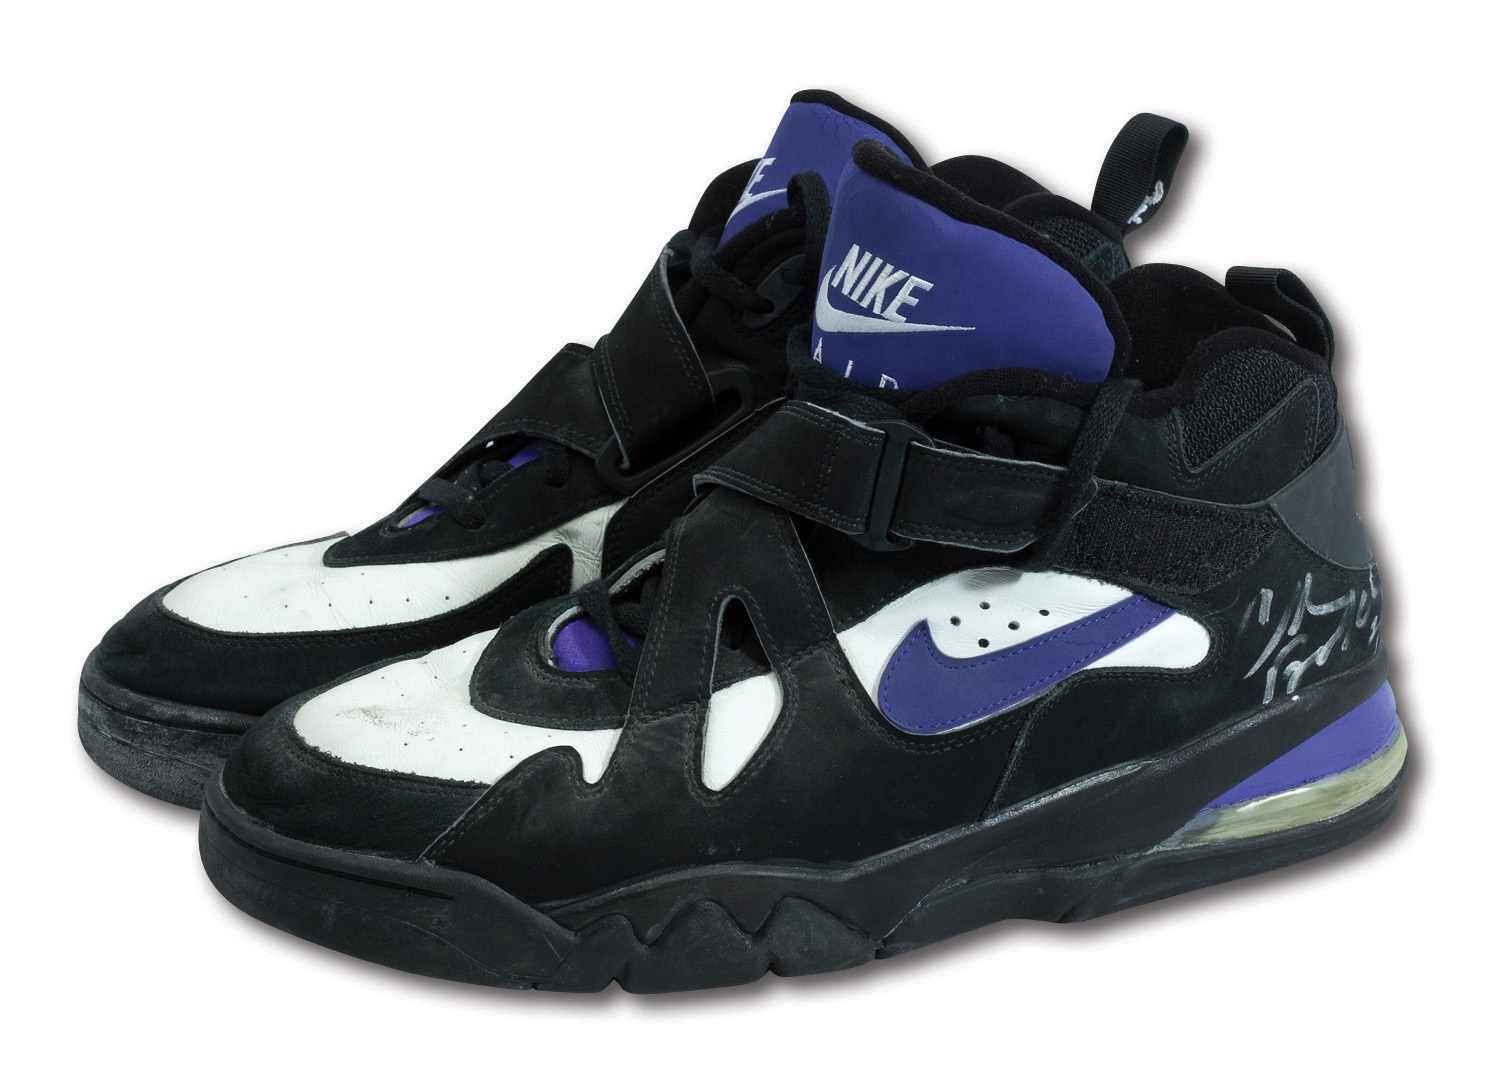 Charles Barkley Signed Pair of Game-Used Nike Basketball Shoes